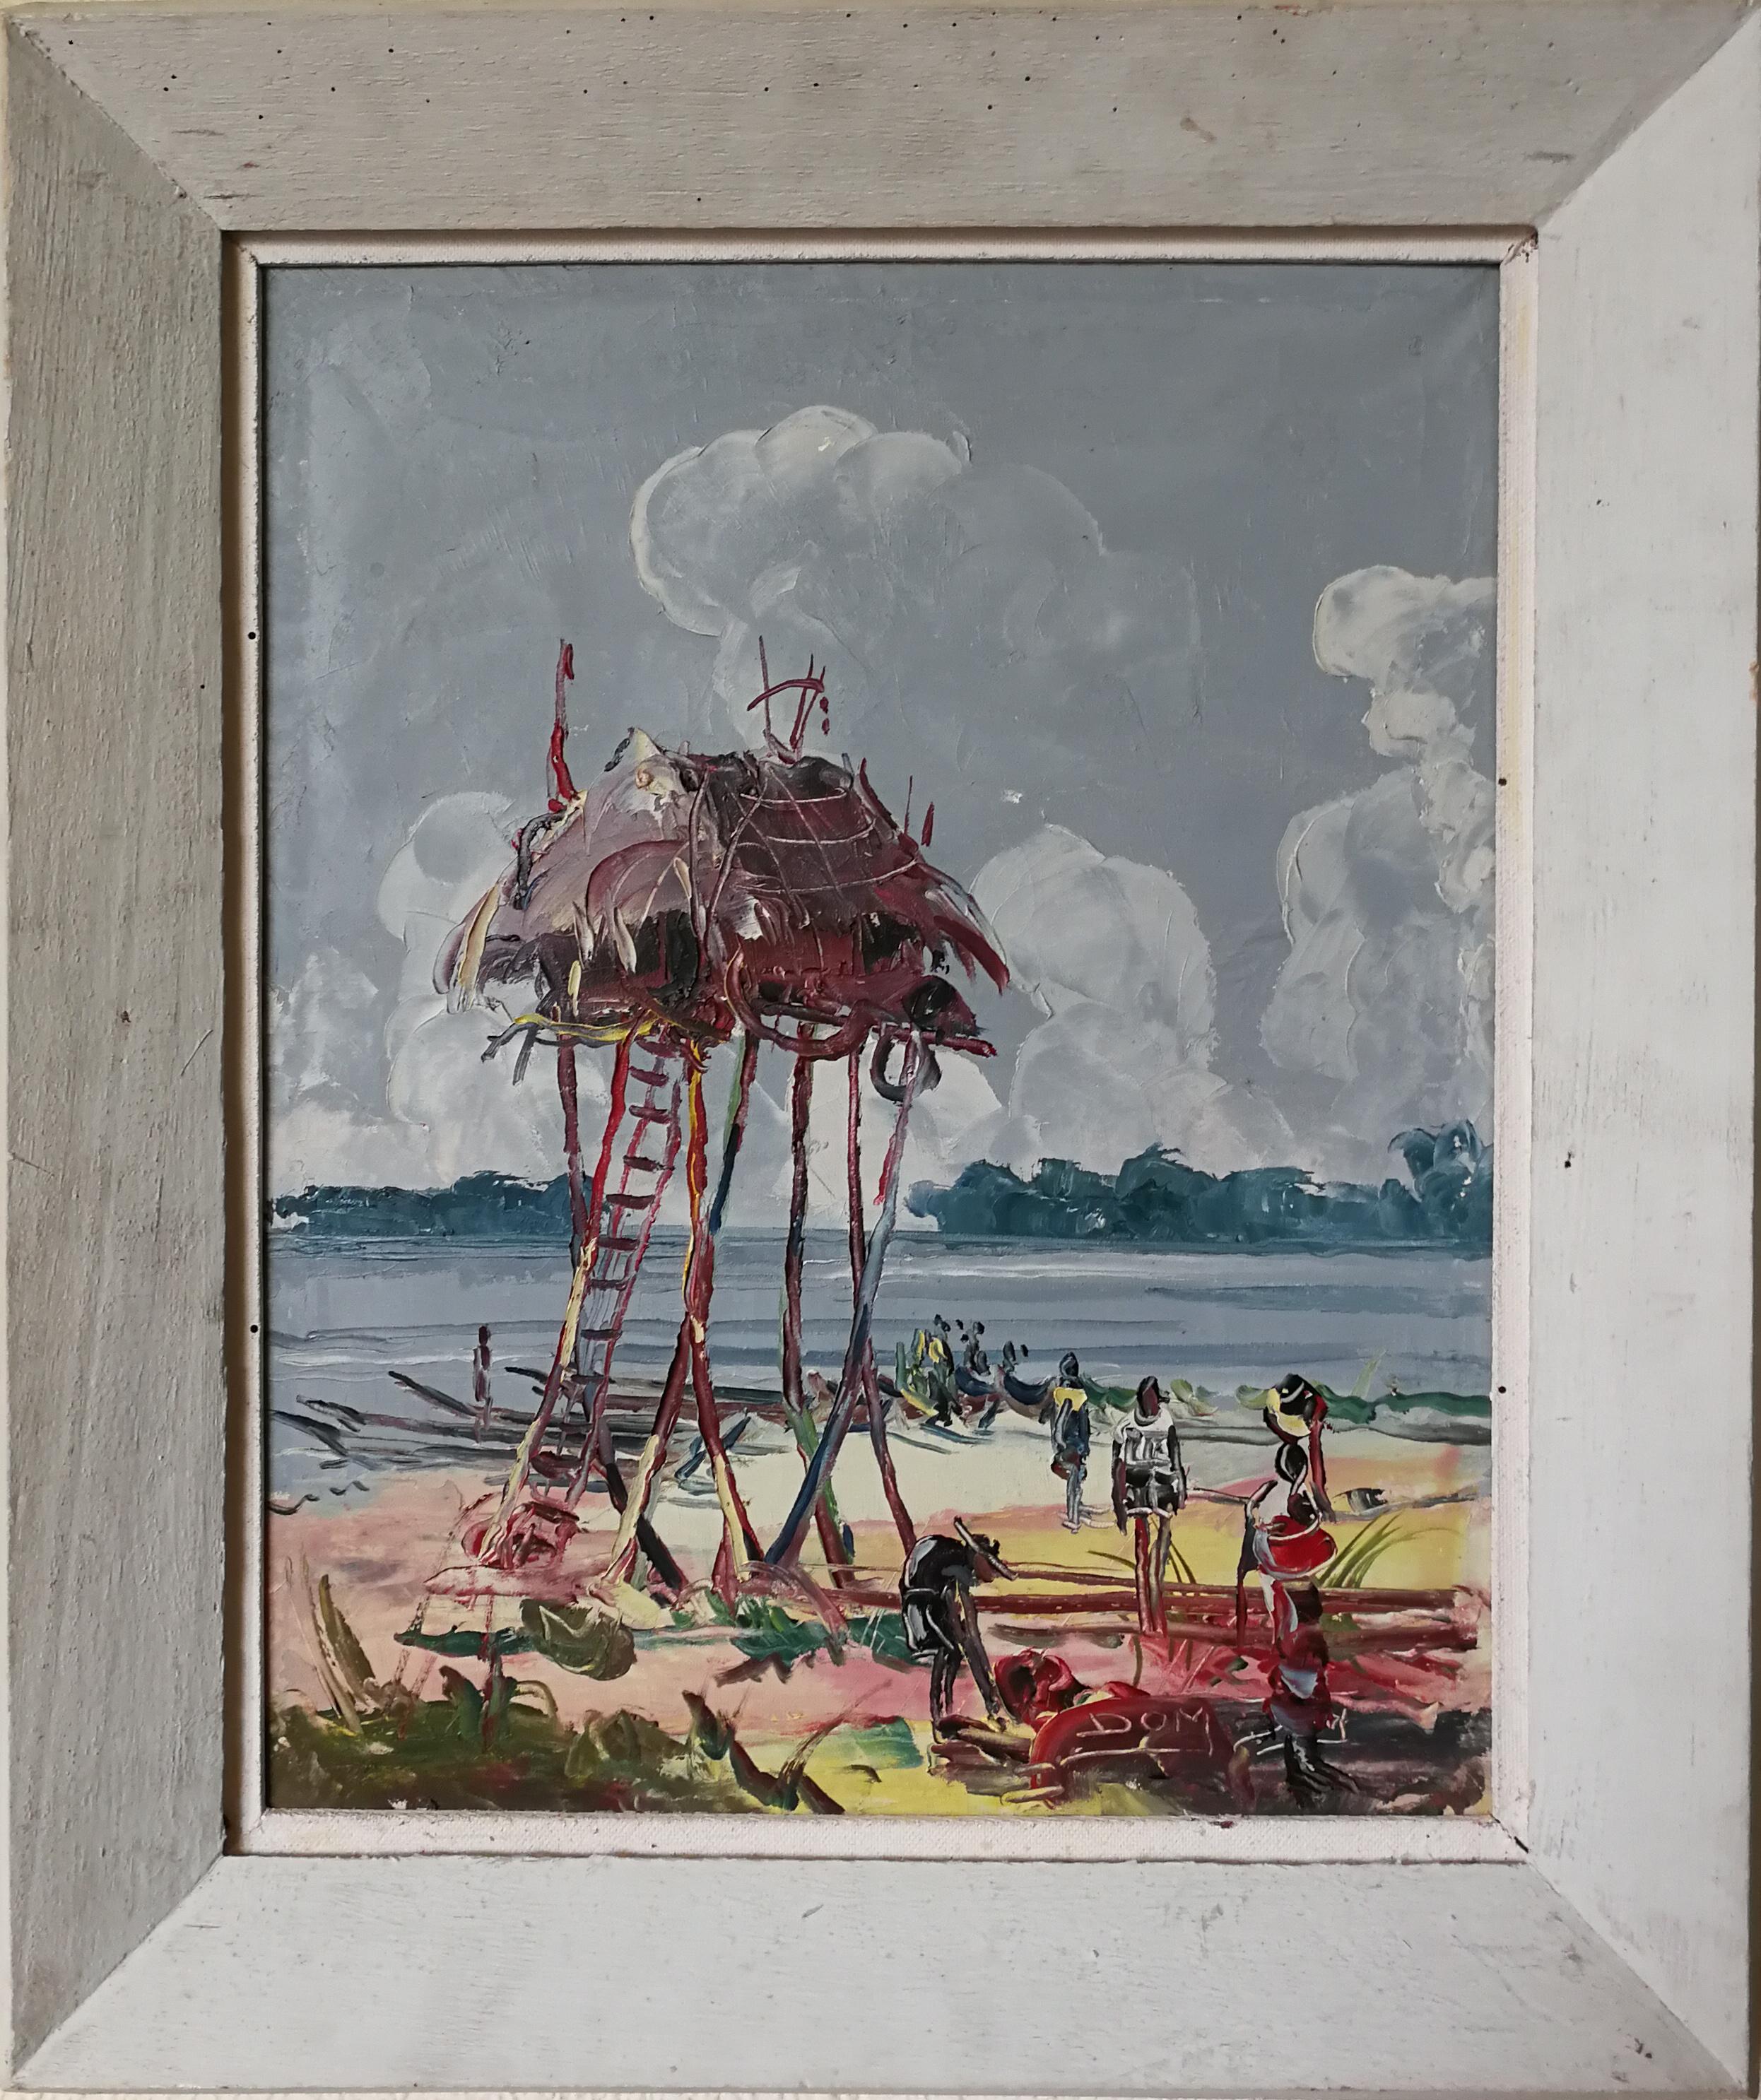 Stilt hut at the Tanganyika lakeshore. African painting from Belgium Congo, signed by DOM around 1950. Knife Painting. Oil on canvas. Original frame. 
 DOM is a prolific painter with a passion for painting with knives. He depicts traditional